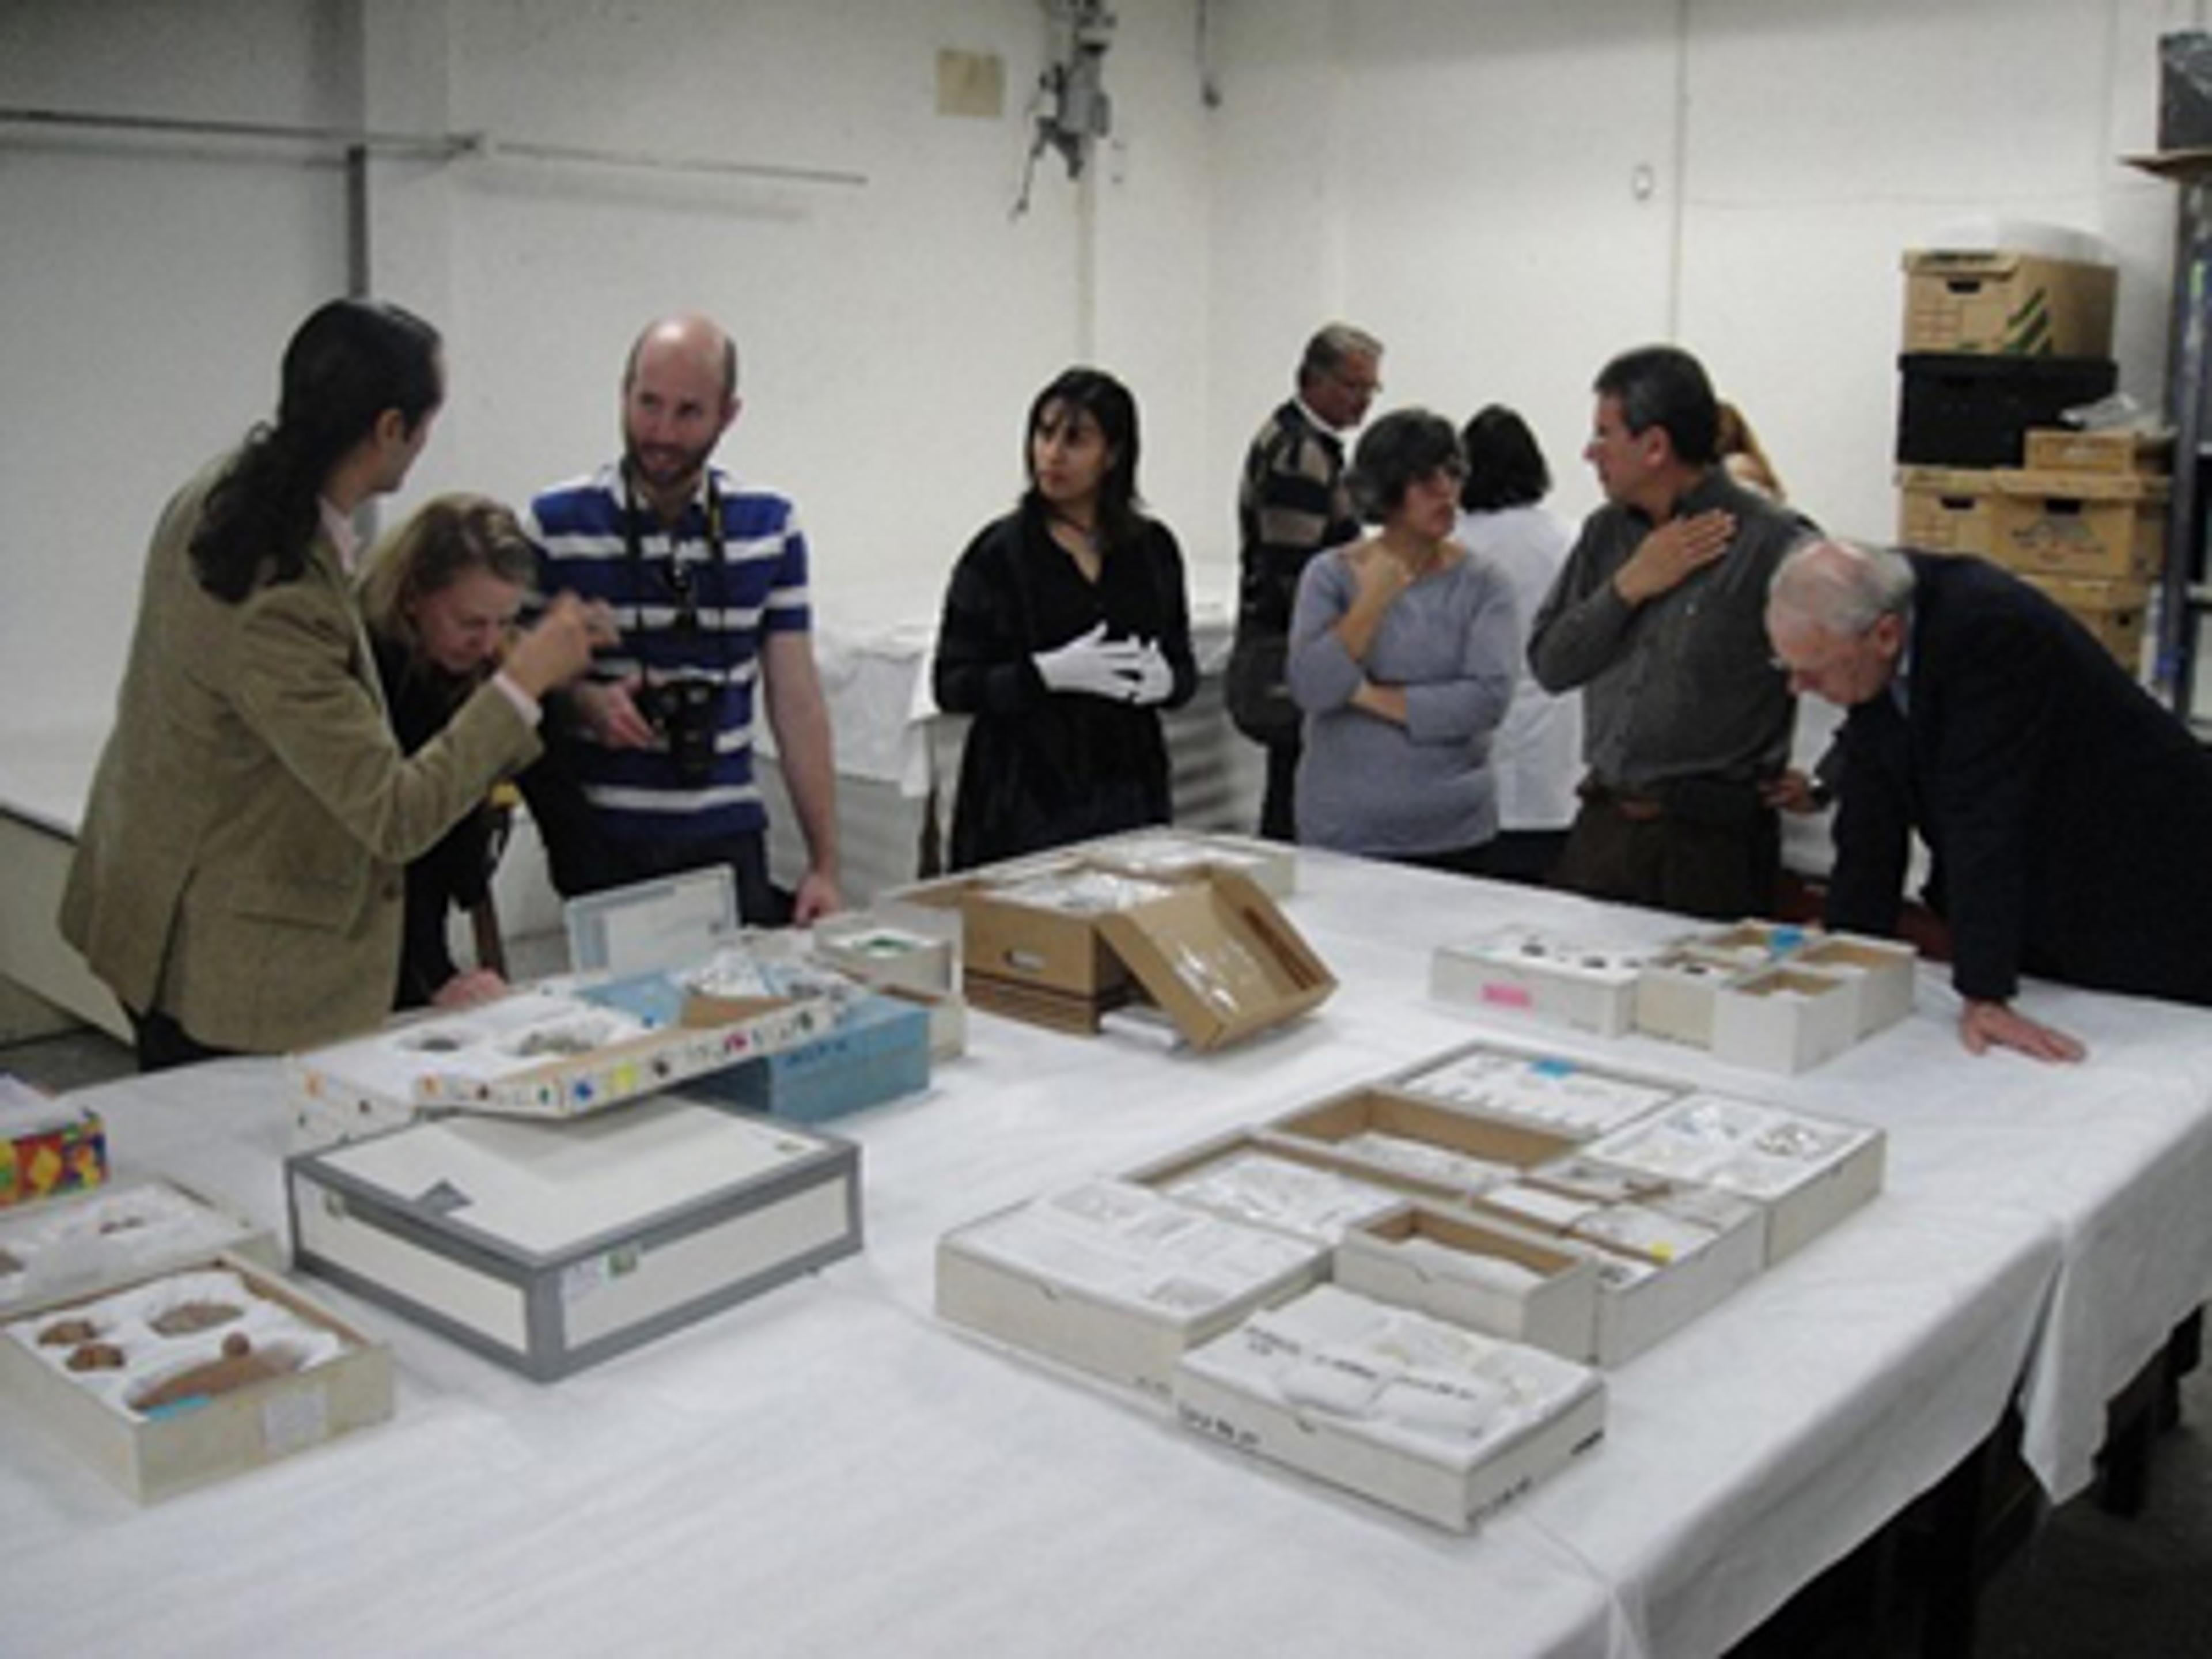 A group of art scholars, archaeologists, and researchers convene around a table to view artifacts under discussion